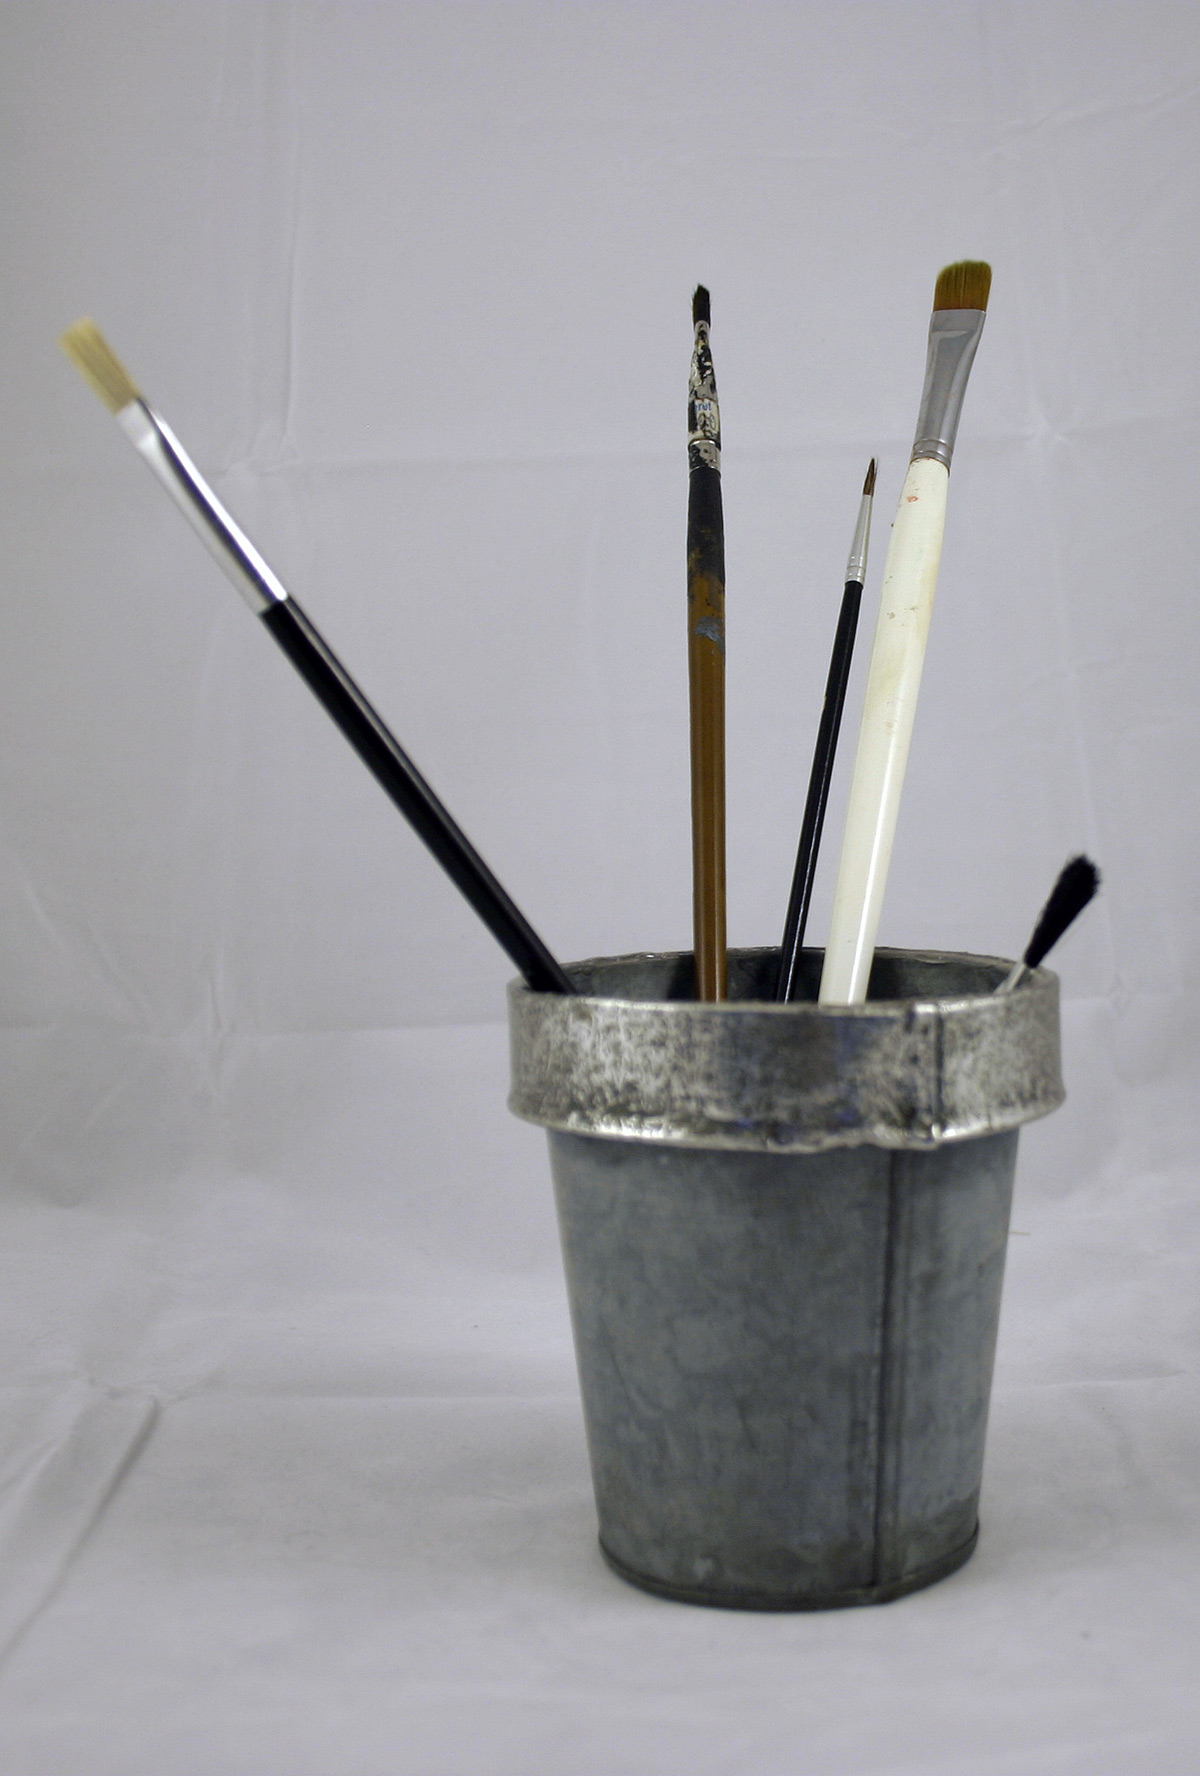 Paint brushes in tin can photo